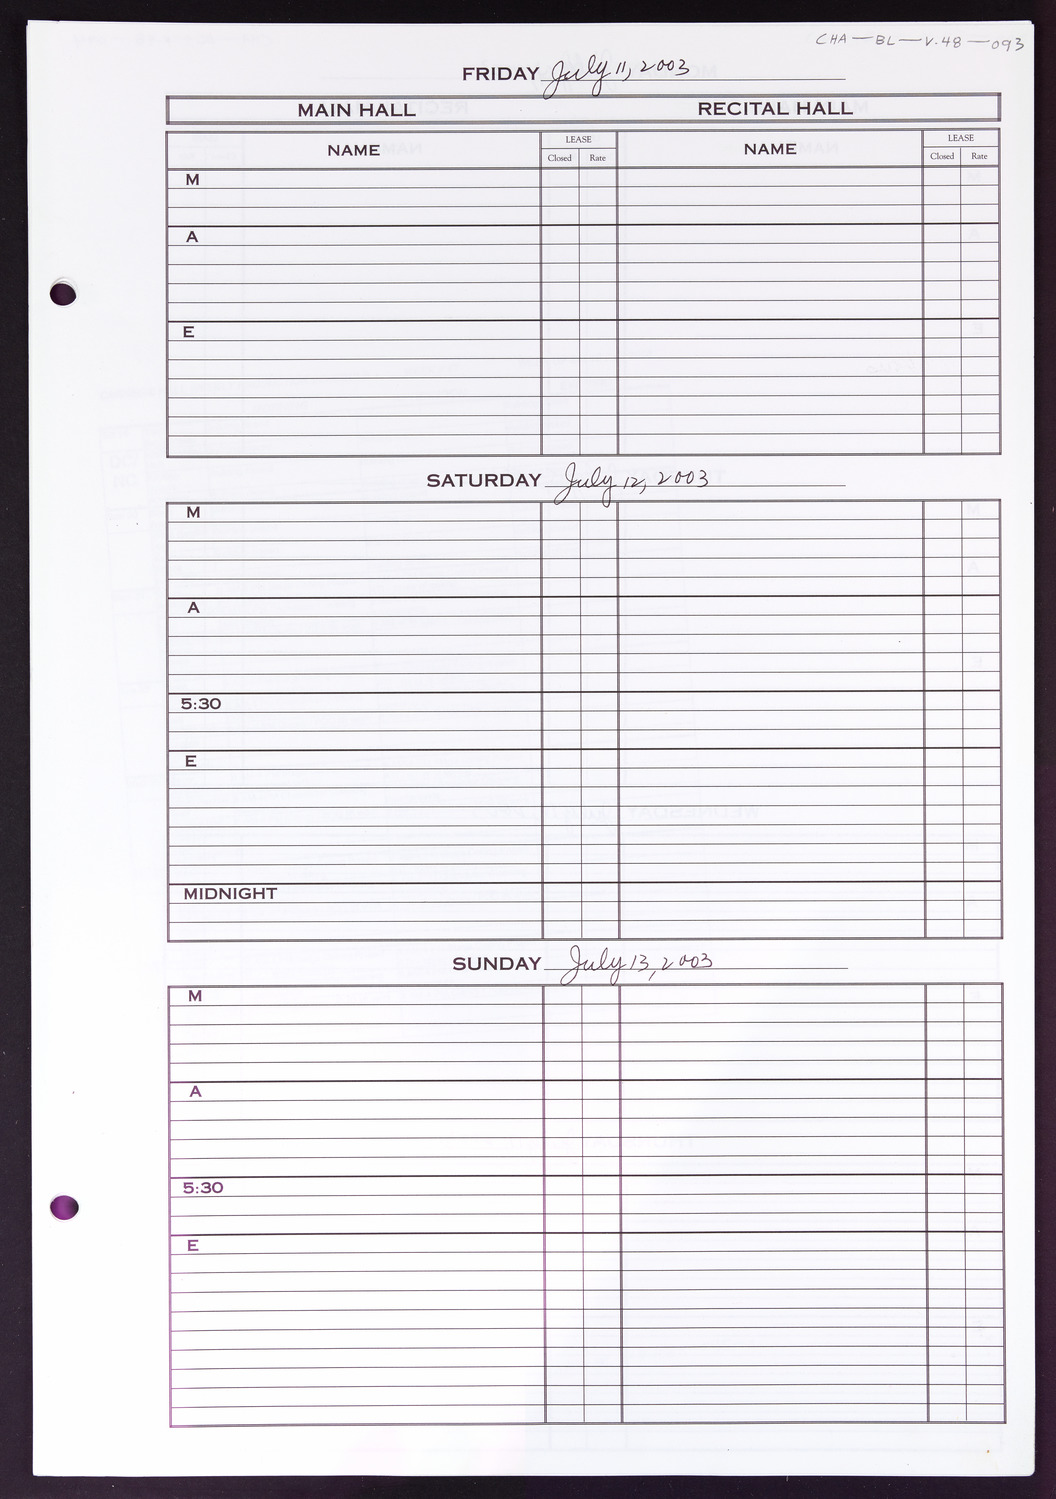 Carnegie Hall Booking Ledger, volume 48, page 93